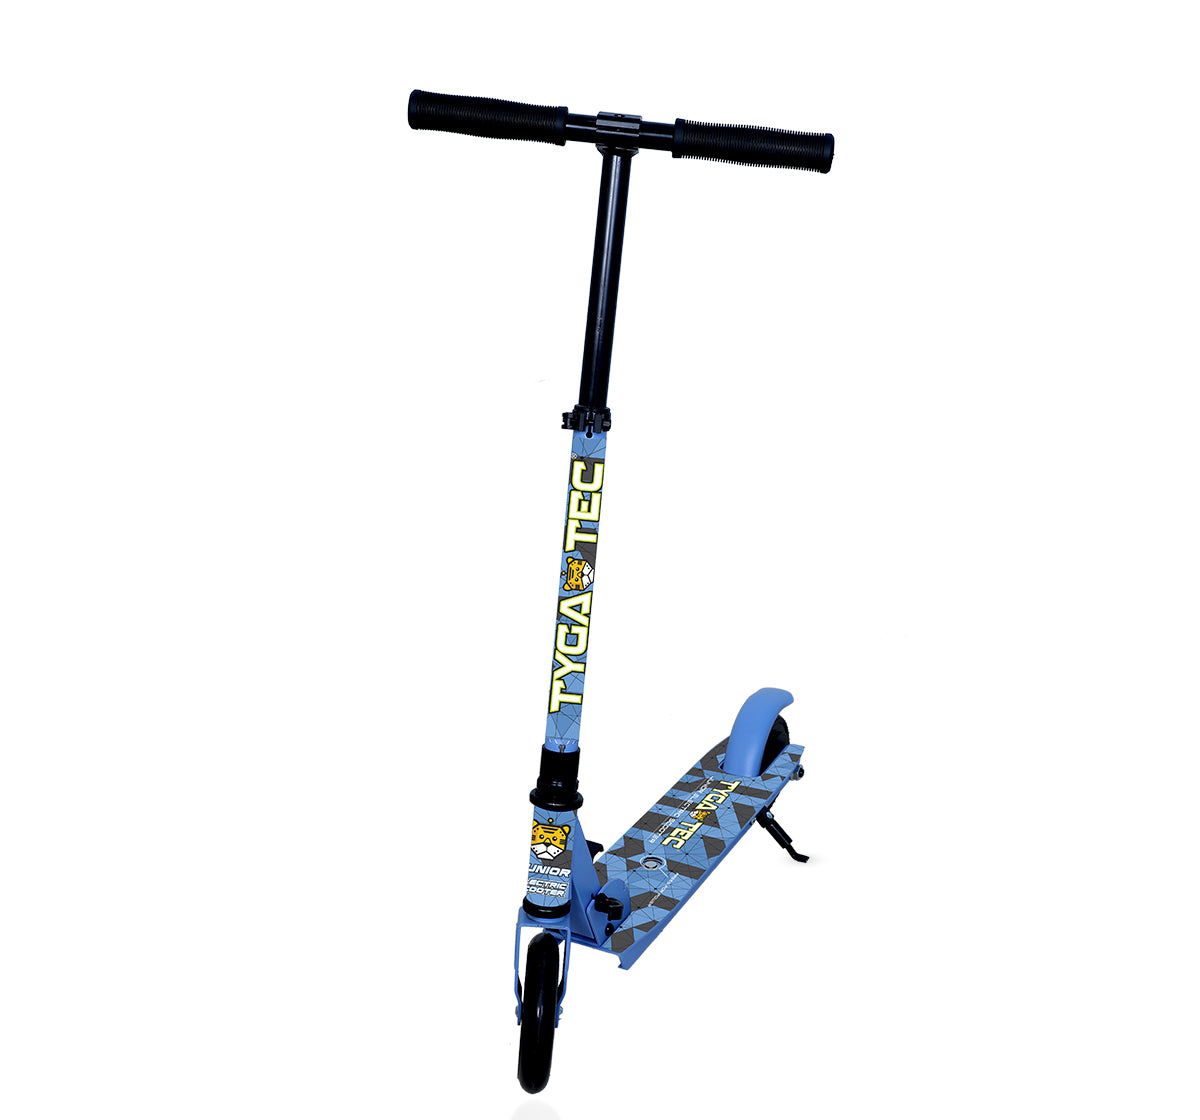 TYGATEC - Junior Electric Scooter (Color blue)